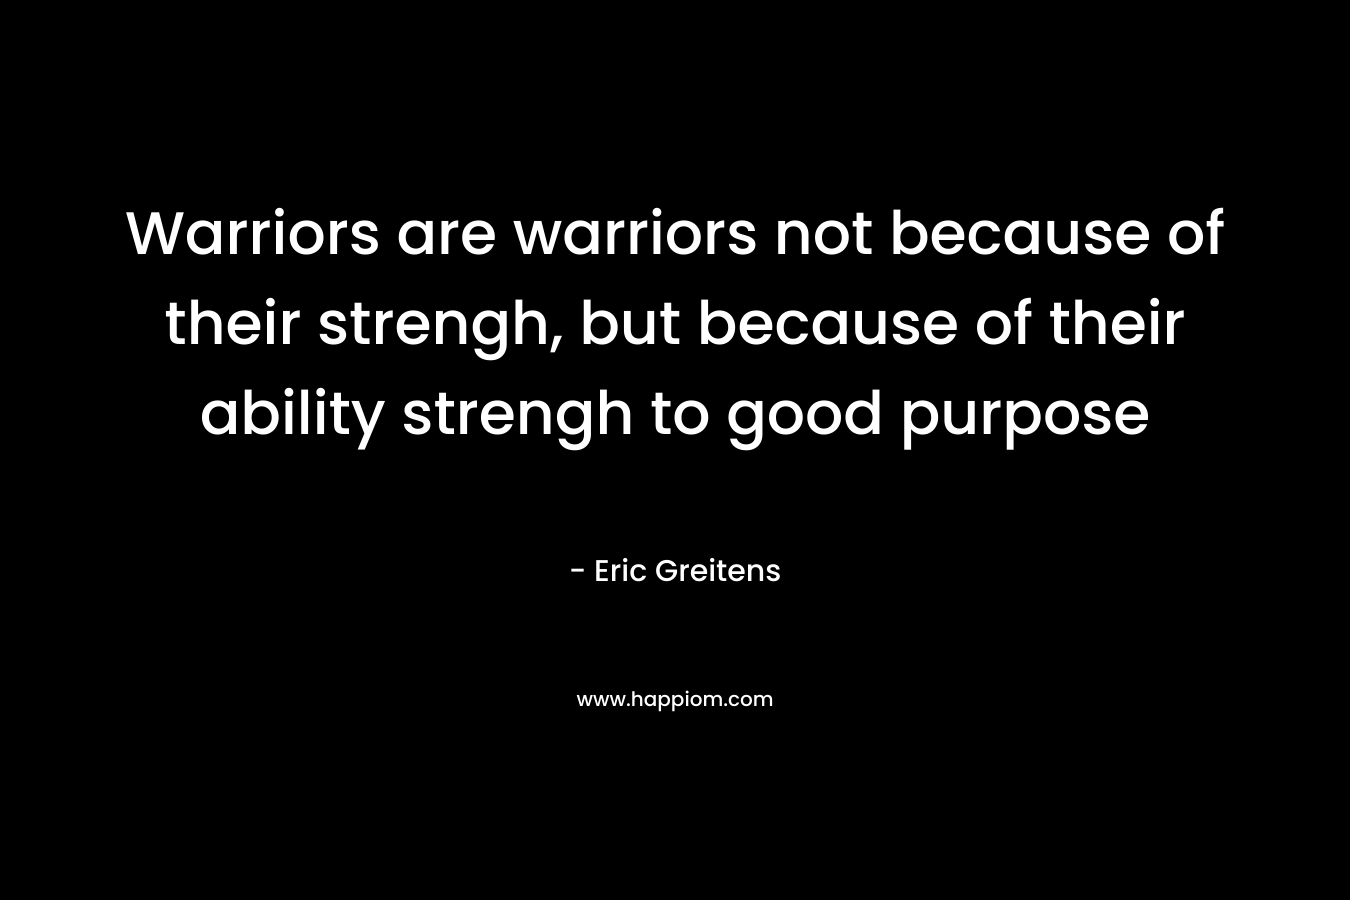 Warriors are warriors not because of their strengh, but because of their ability strengh to good purpose – Eric Greitens